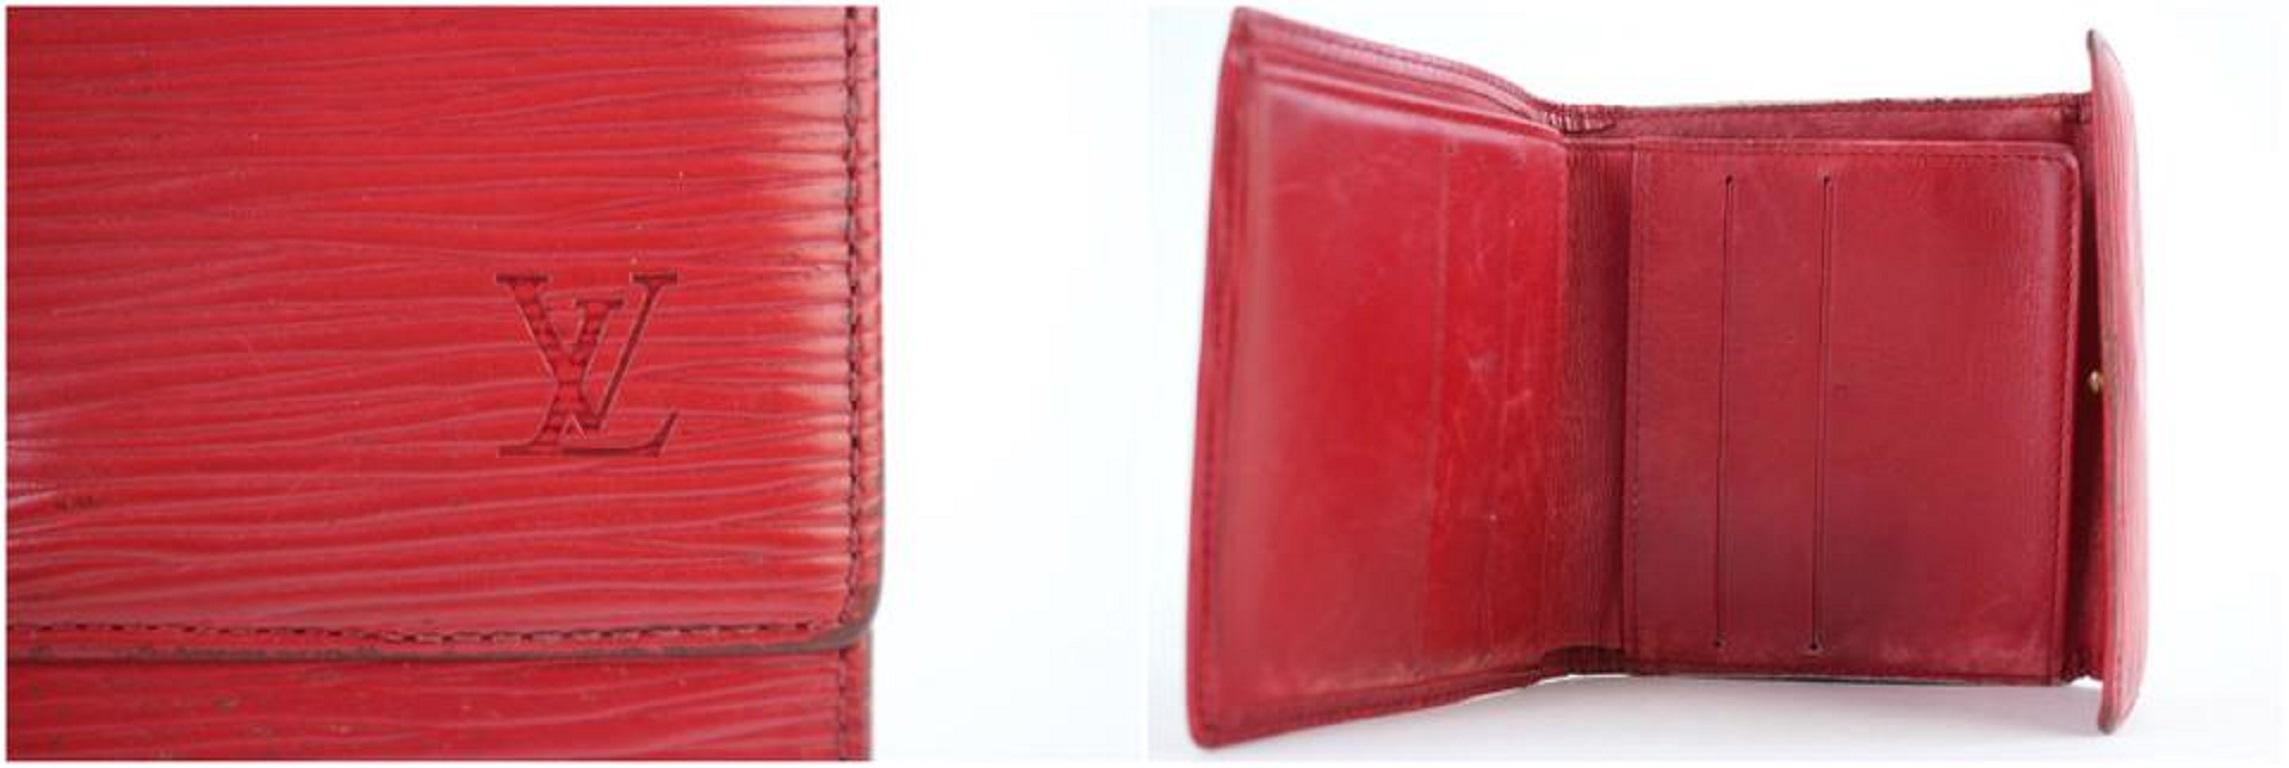 Louis Vuitton Red Epi Compact 7lk1002 Wallet In Good Condition For Sale In Dix hills, NY